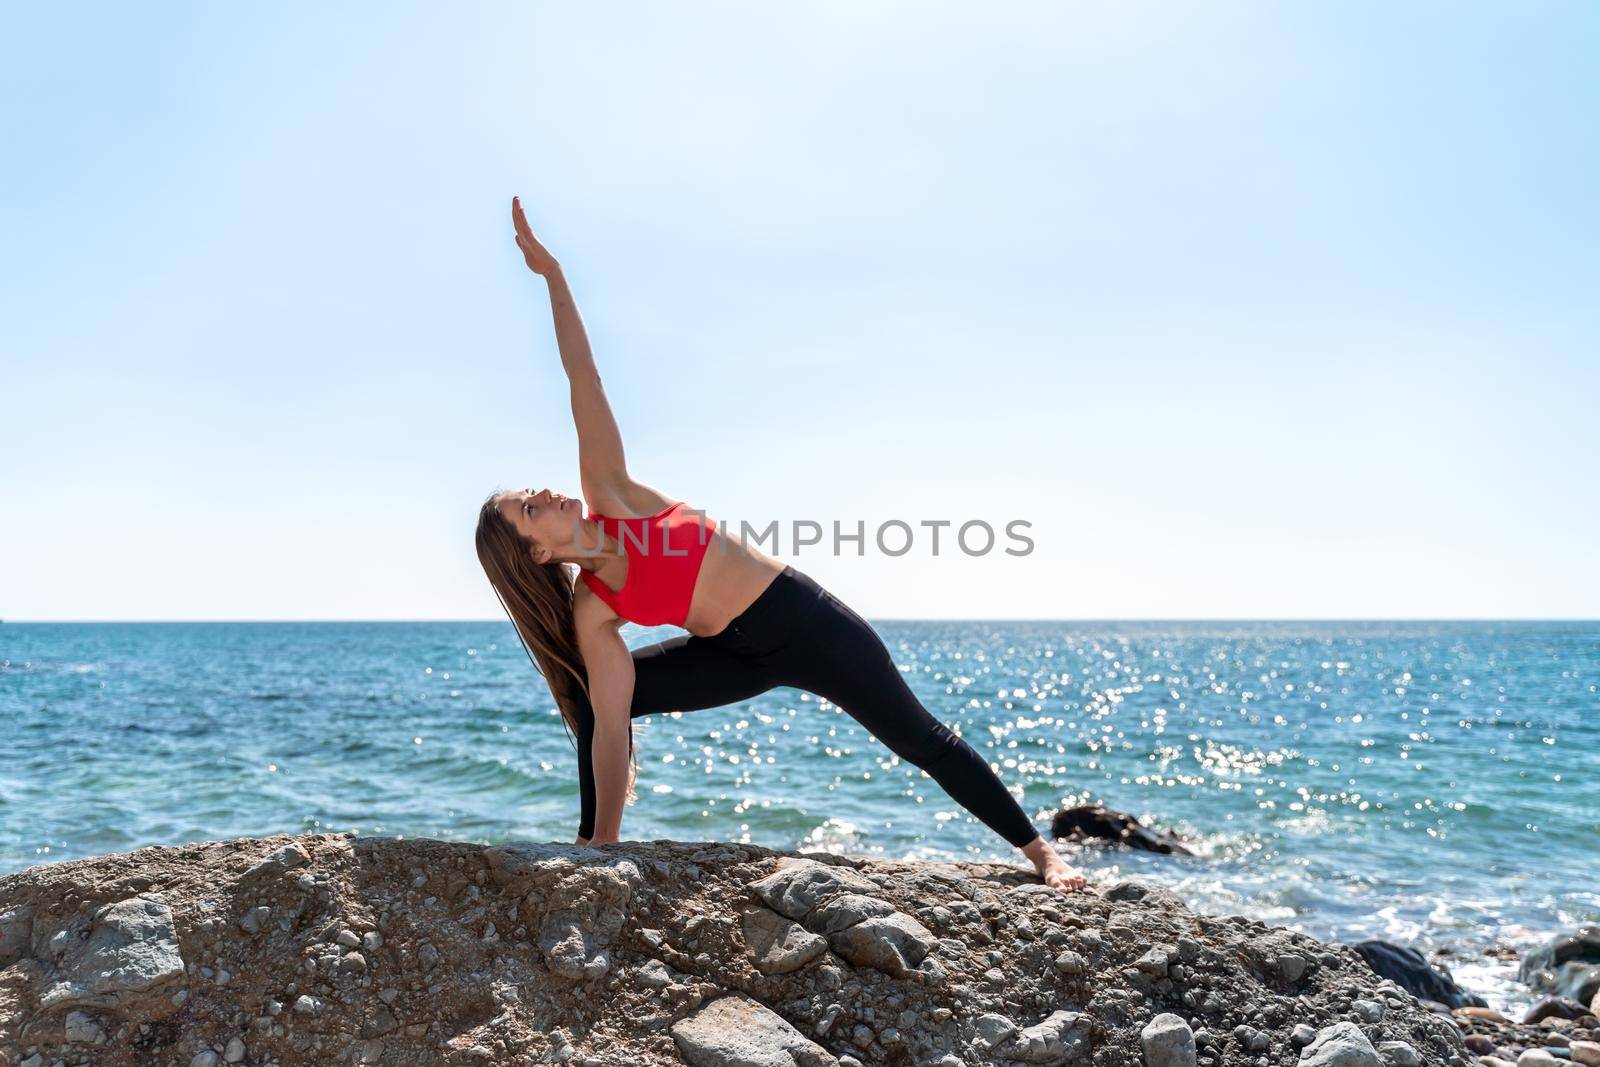 Young woman in black leggings and a red top with long flowing hair practicing stretching outdoors by the sea on a sunny day. Women's yoga, fitness, pilates. The concept of a healthy lifestyle, harmony